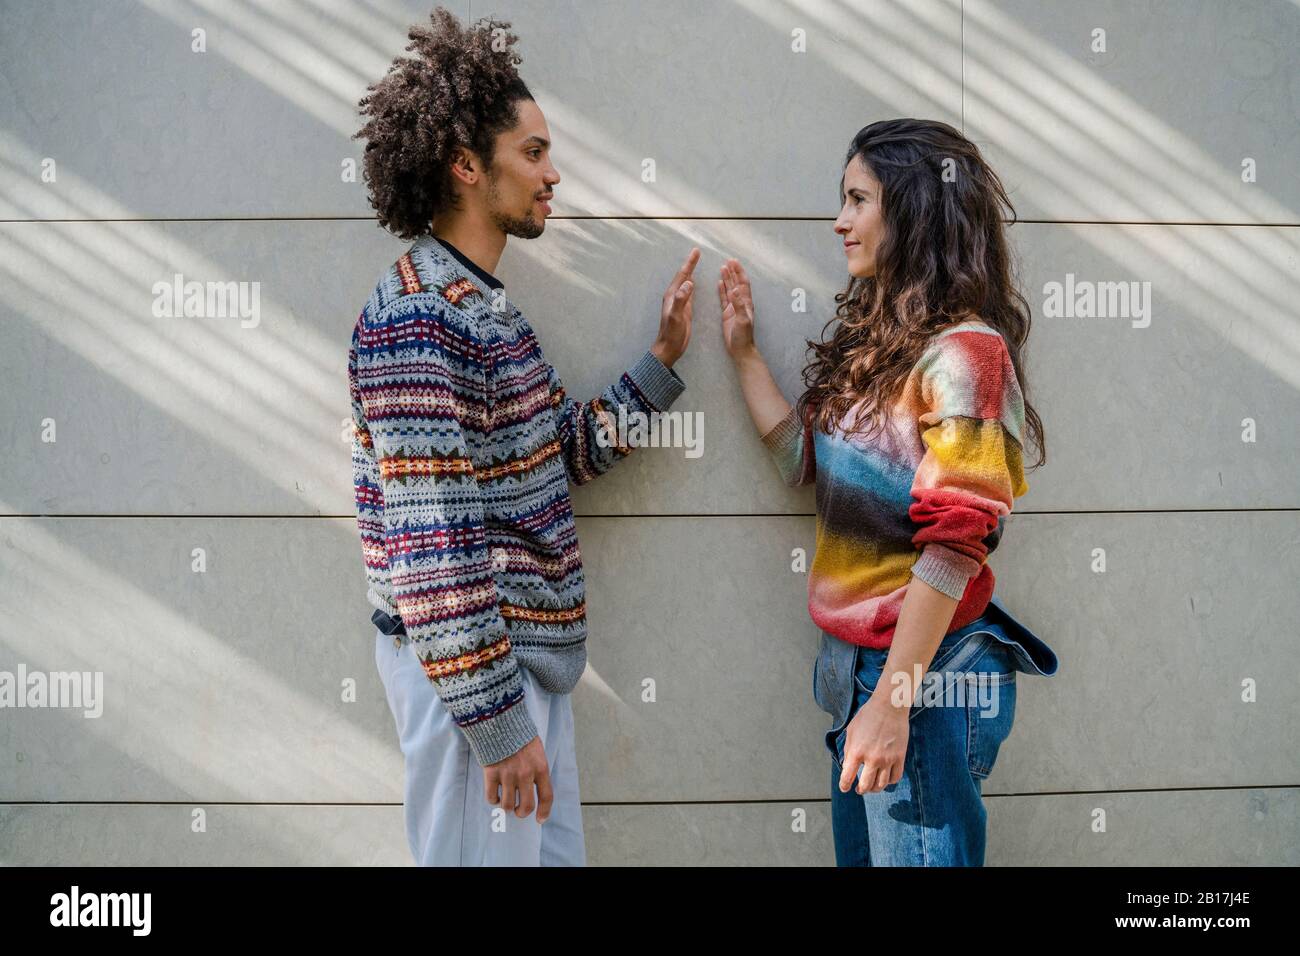 Couple of dancers face to face in front of a wall Stock Photo